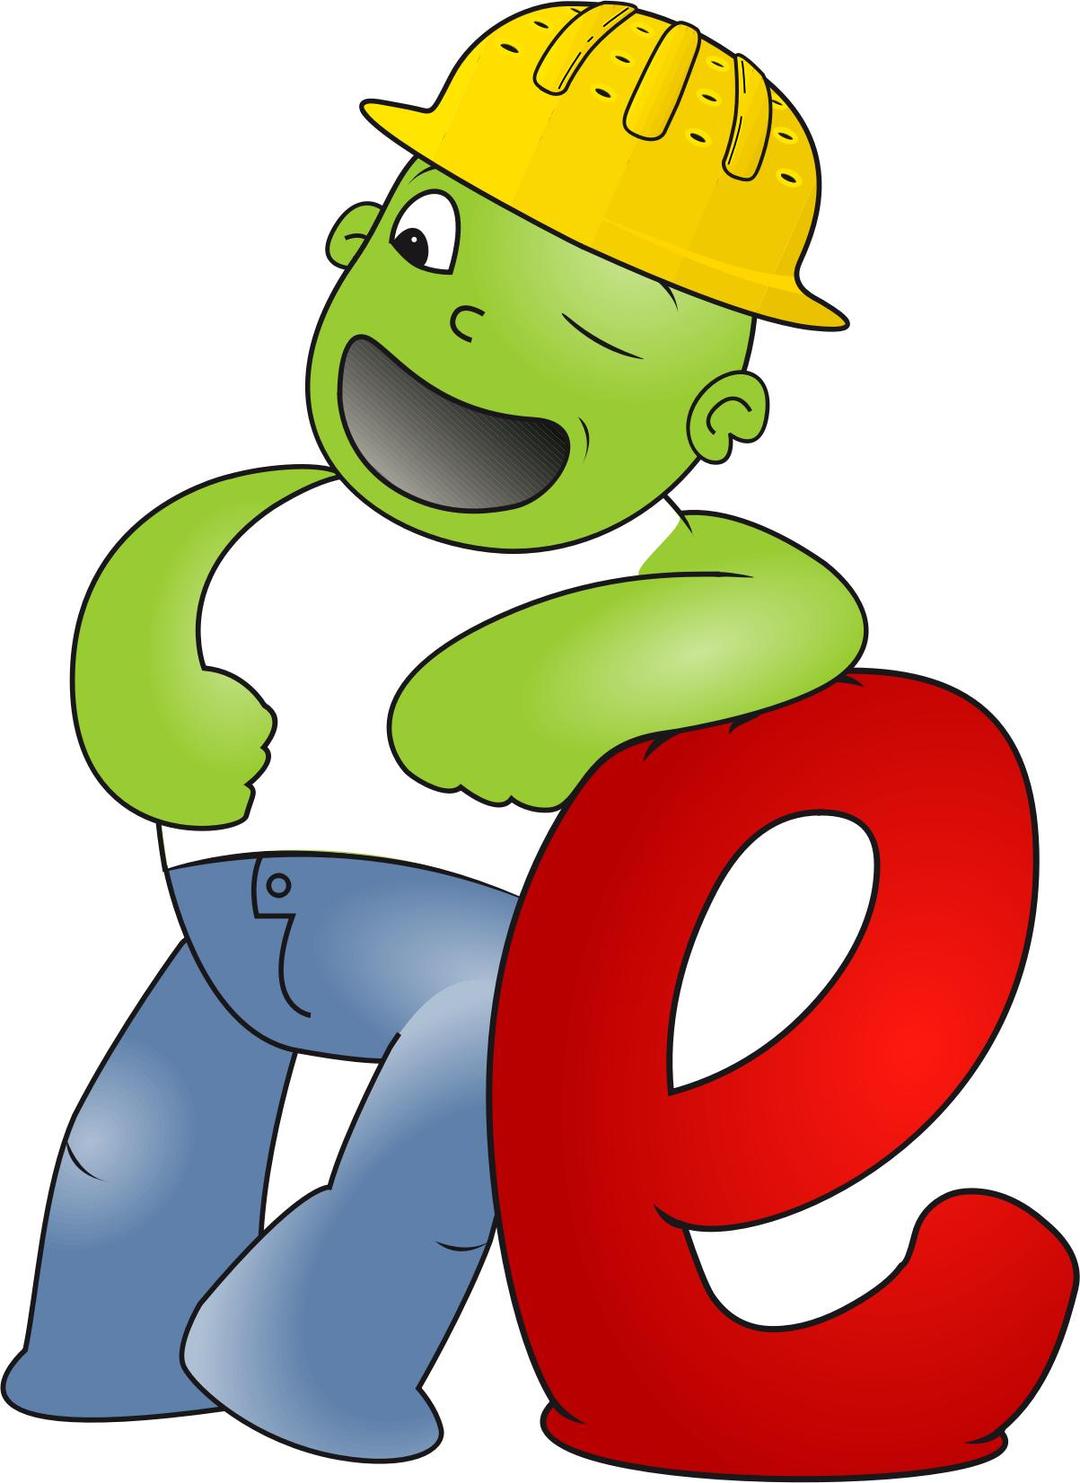 pea spanish worker png transparent